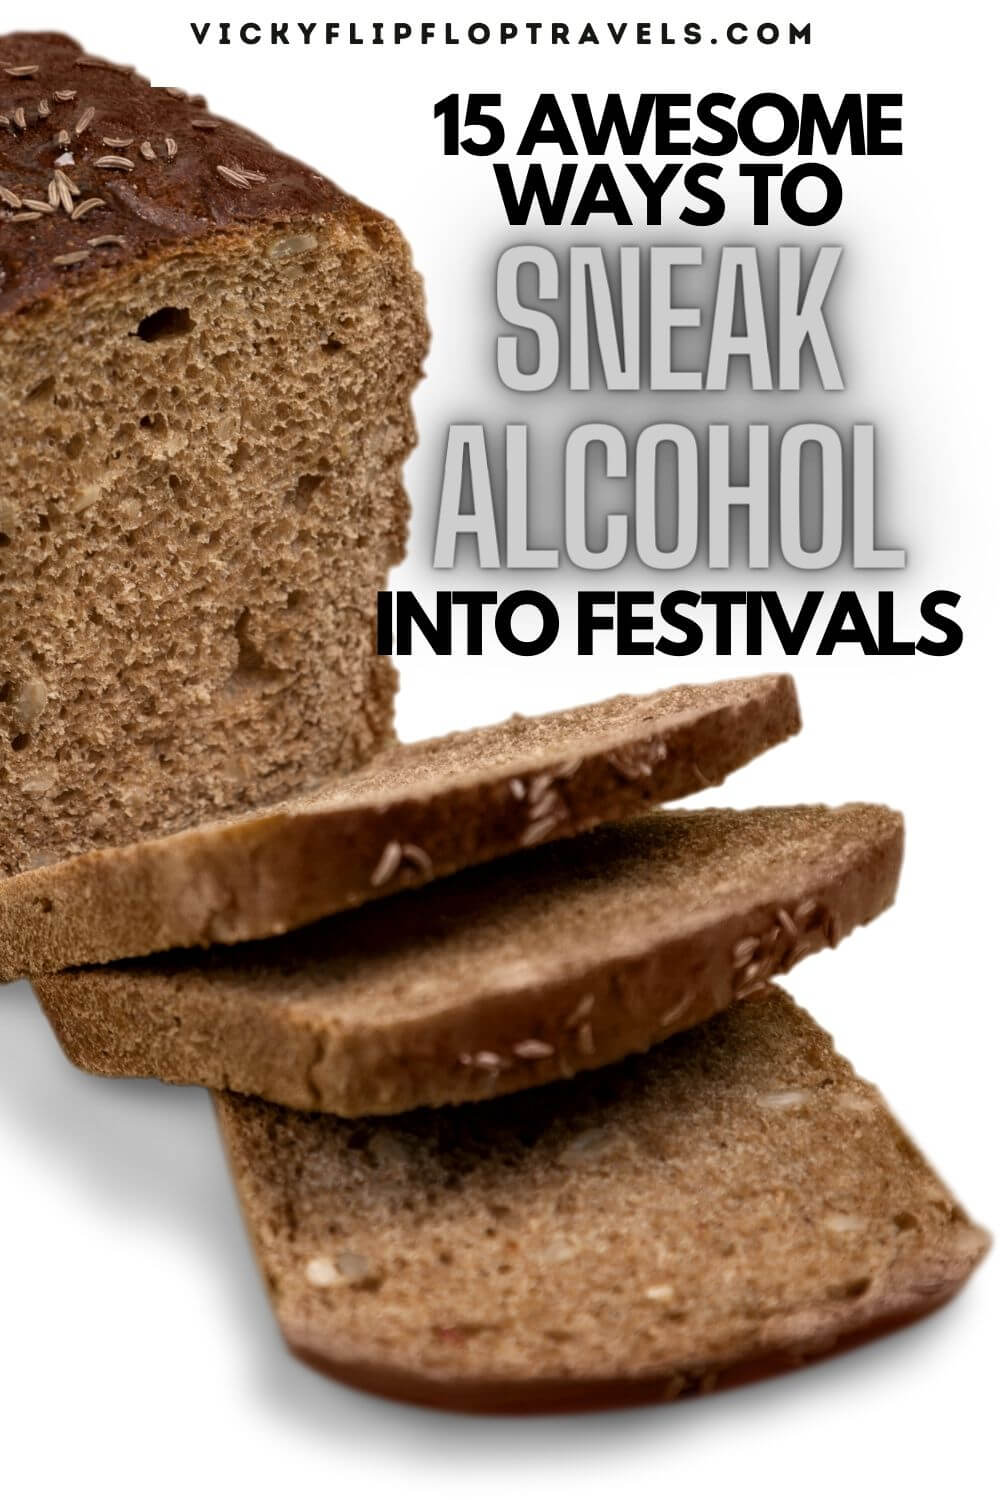 19 Awesome Ways to Sneak Alcohol into Festivals (or Anywhere